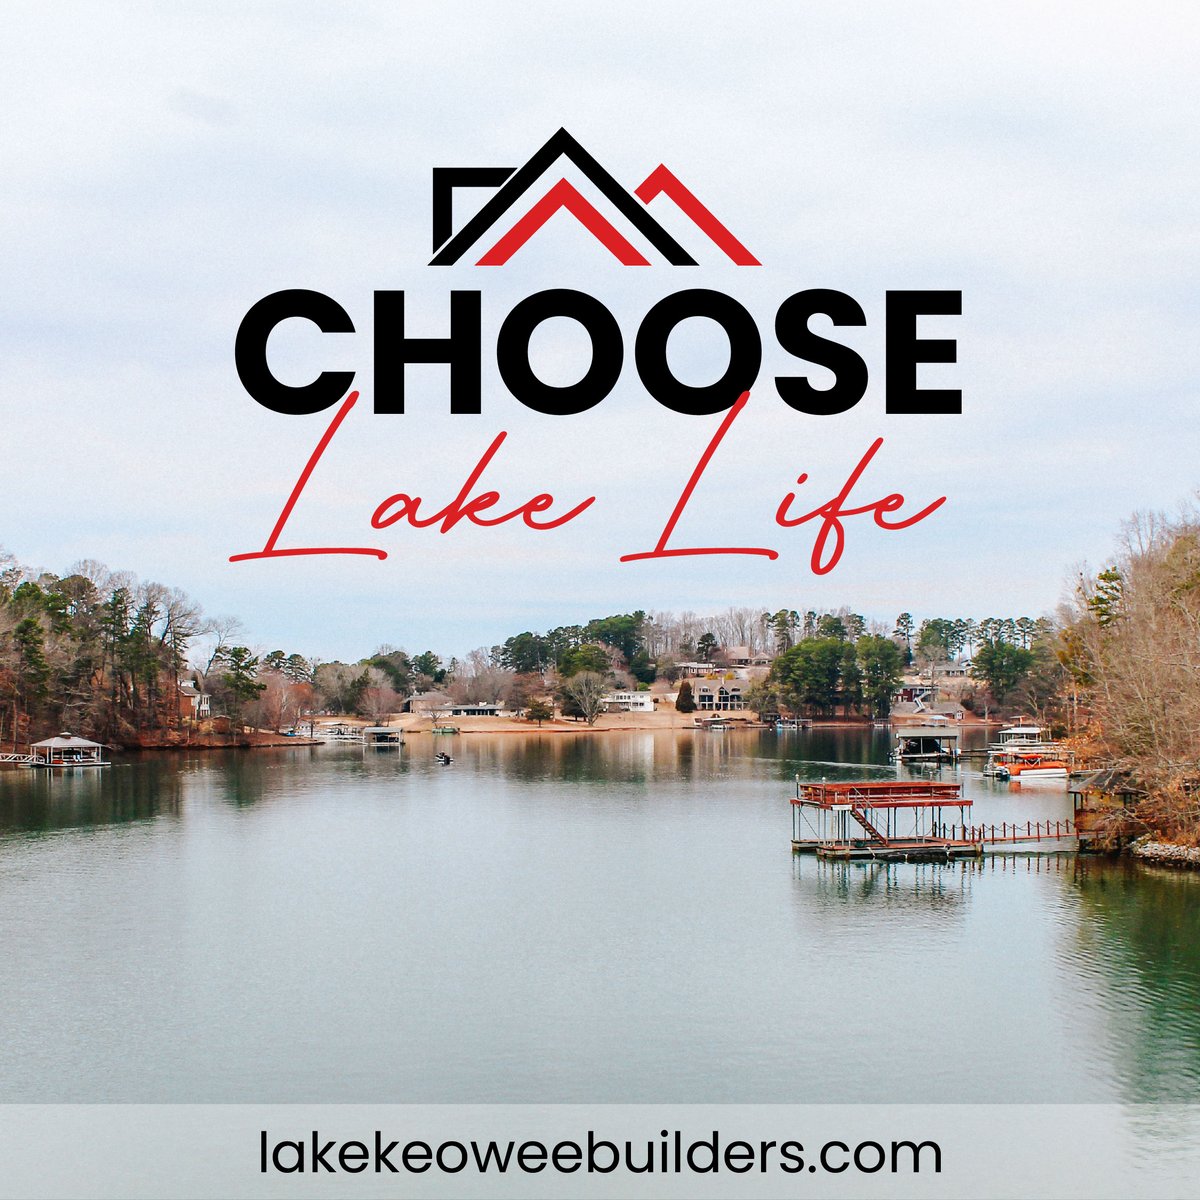 Choose the serenity of lake life with Integrity Builders.

LakeKeoweeBuilders.com

#IntegrityBuilders #LakeKeowee #Seneca #SC #SCBuilder #homebuilder #customhome #construction #architecture #design #building #lakelife #lakehouse